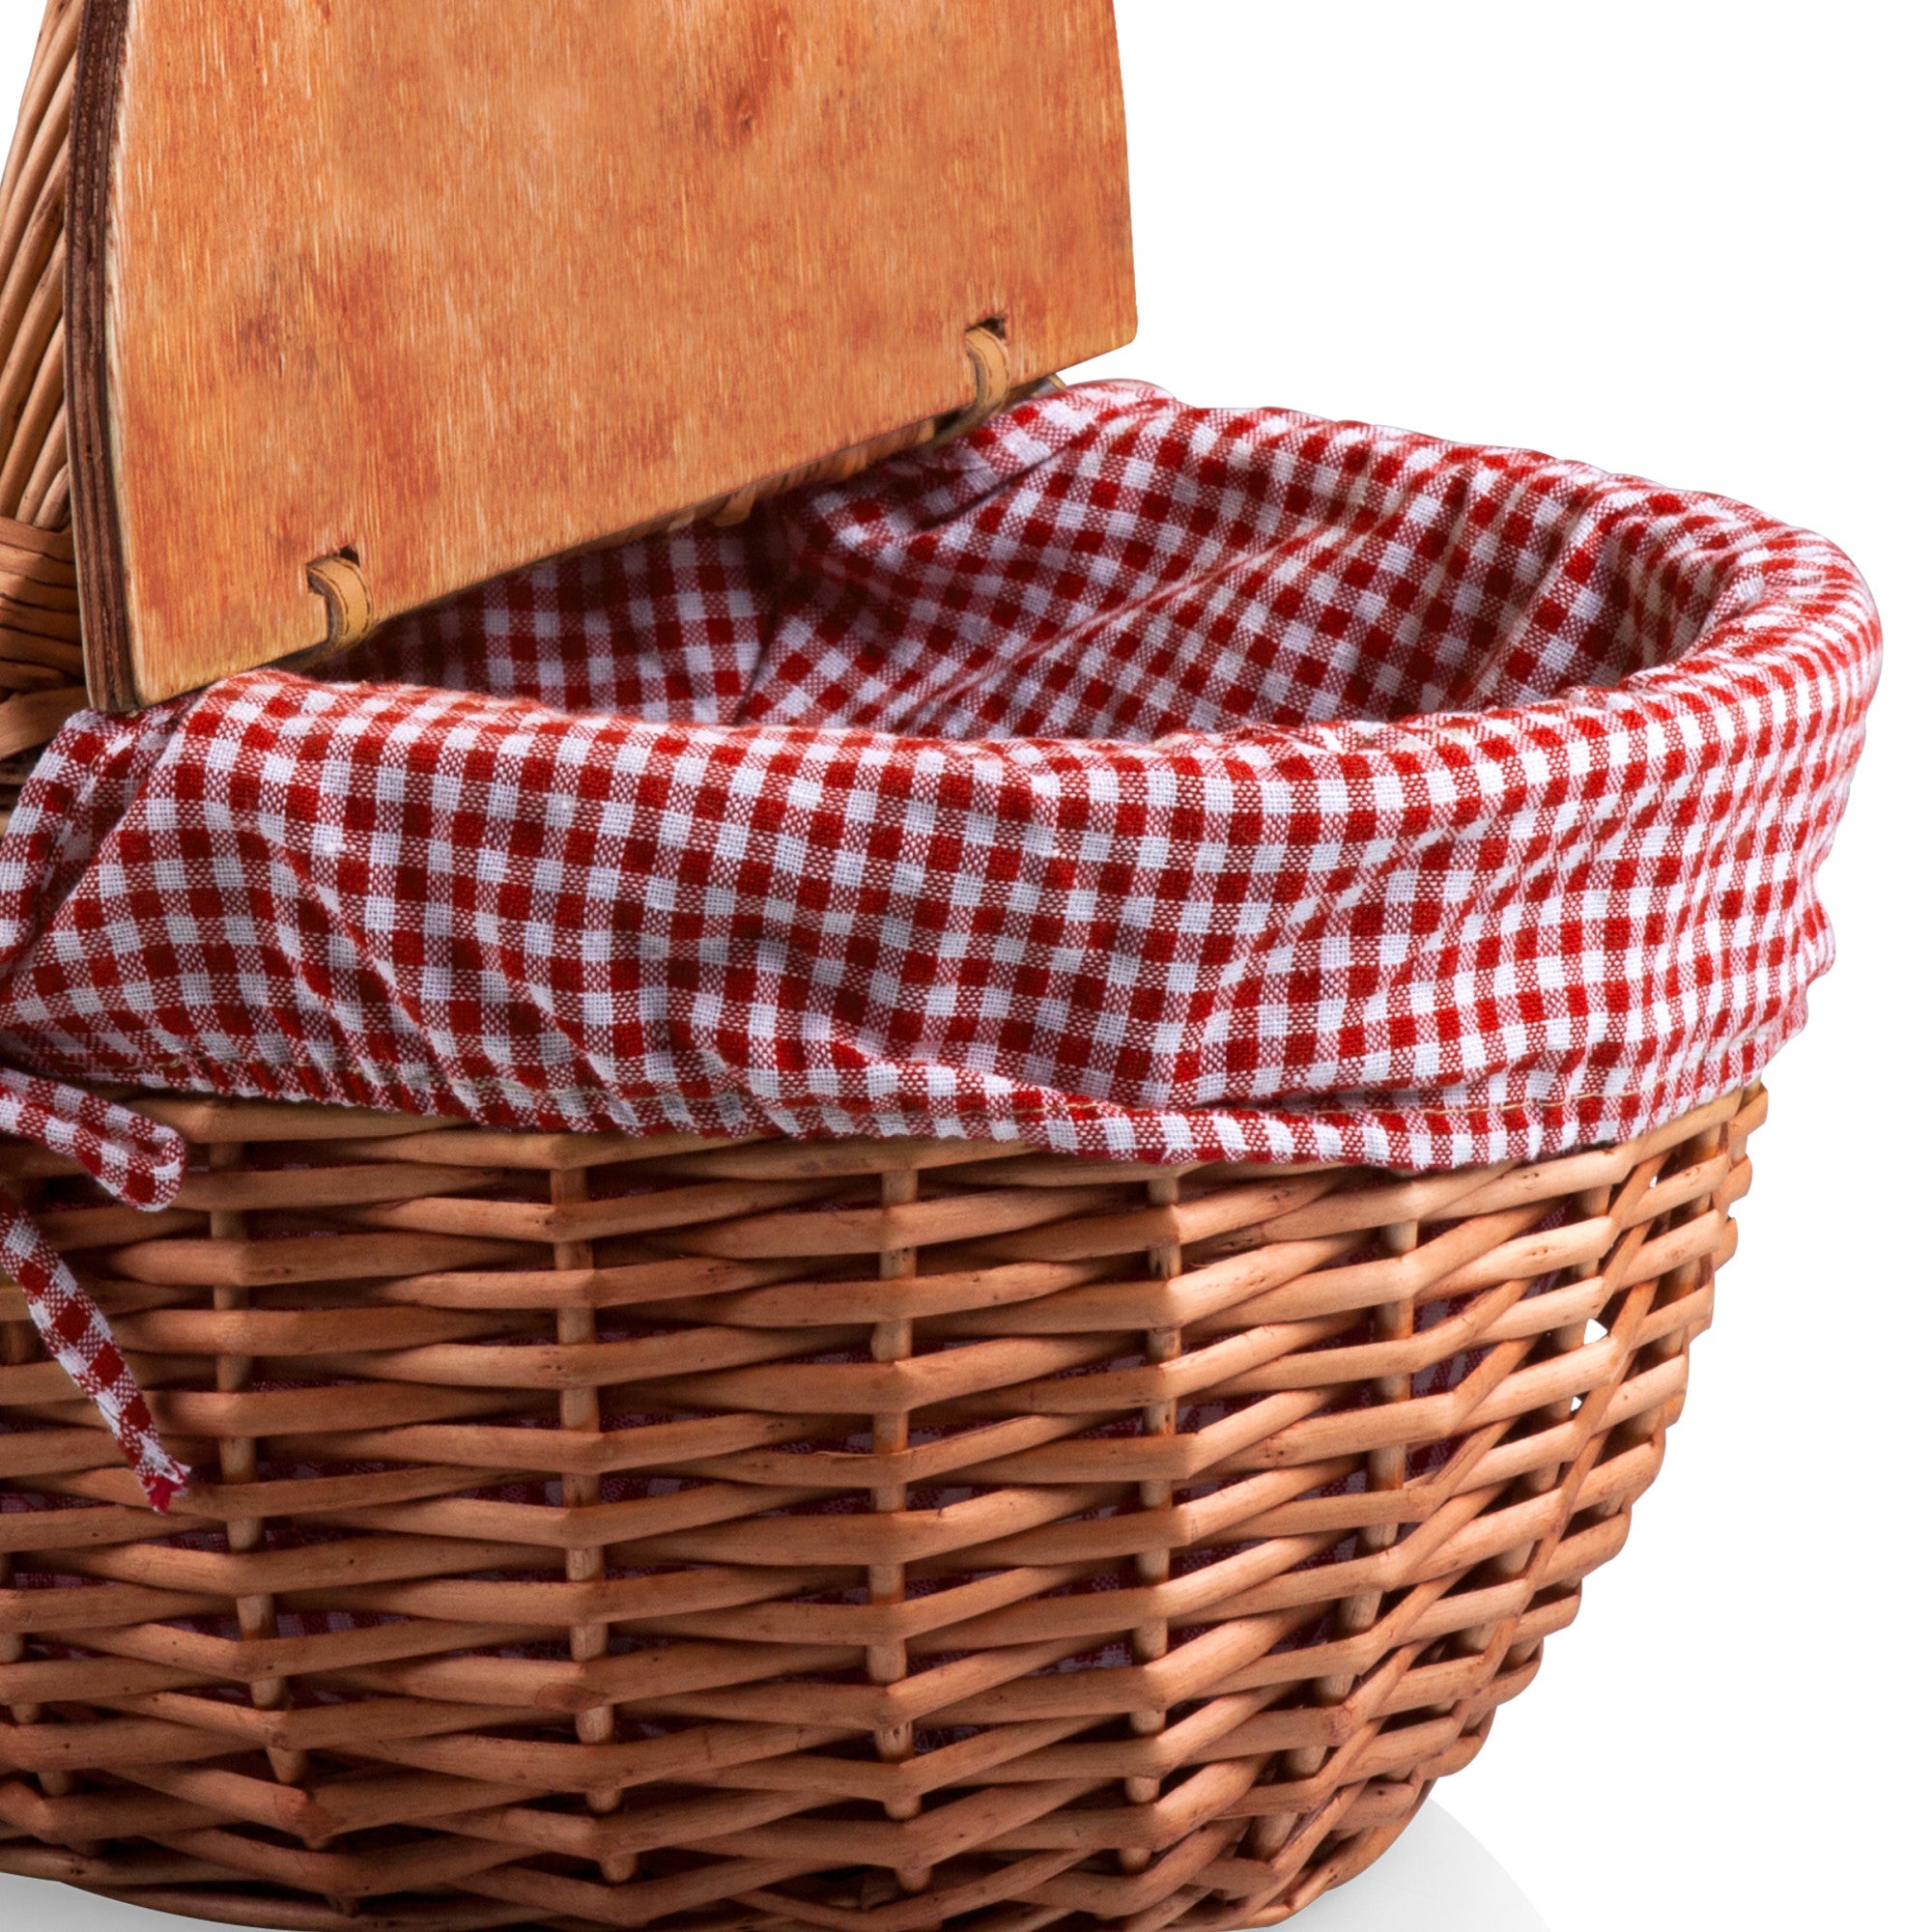 Los Angeles Dodgers - Country Picnic Basket